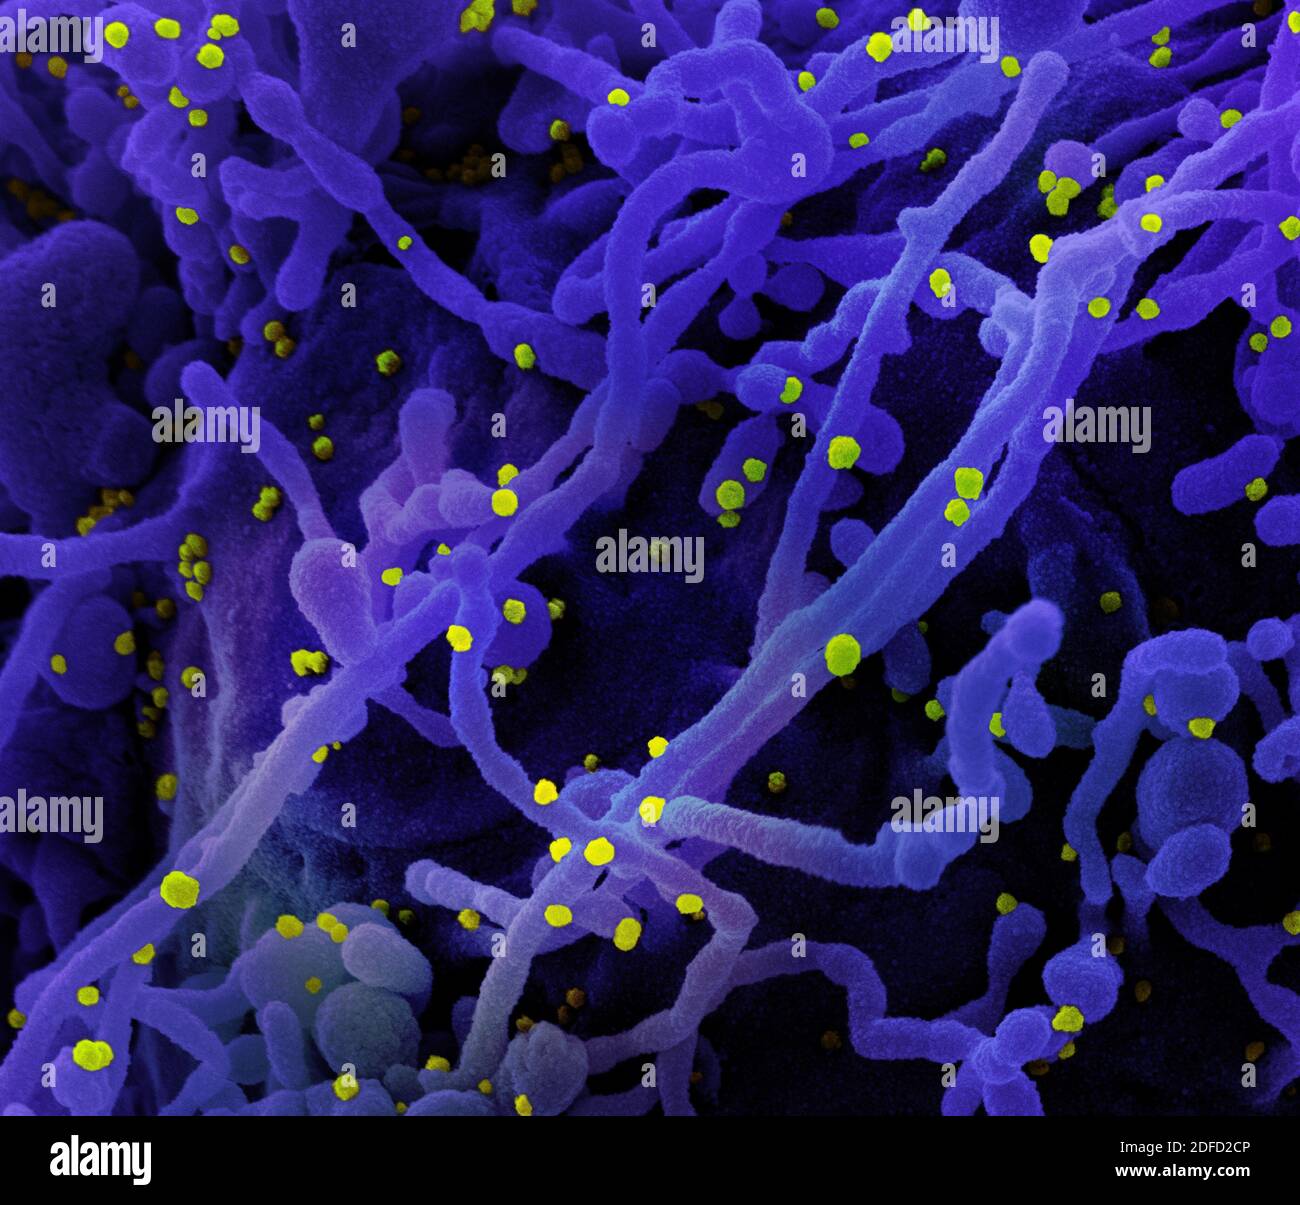 Colorized scanning electron micrograph of a cell (purple) infected with SARS-CoV-2 virus particles (yellow), isolated from a patient sample. Image cap Stock Photo